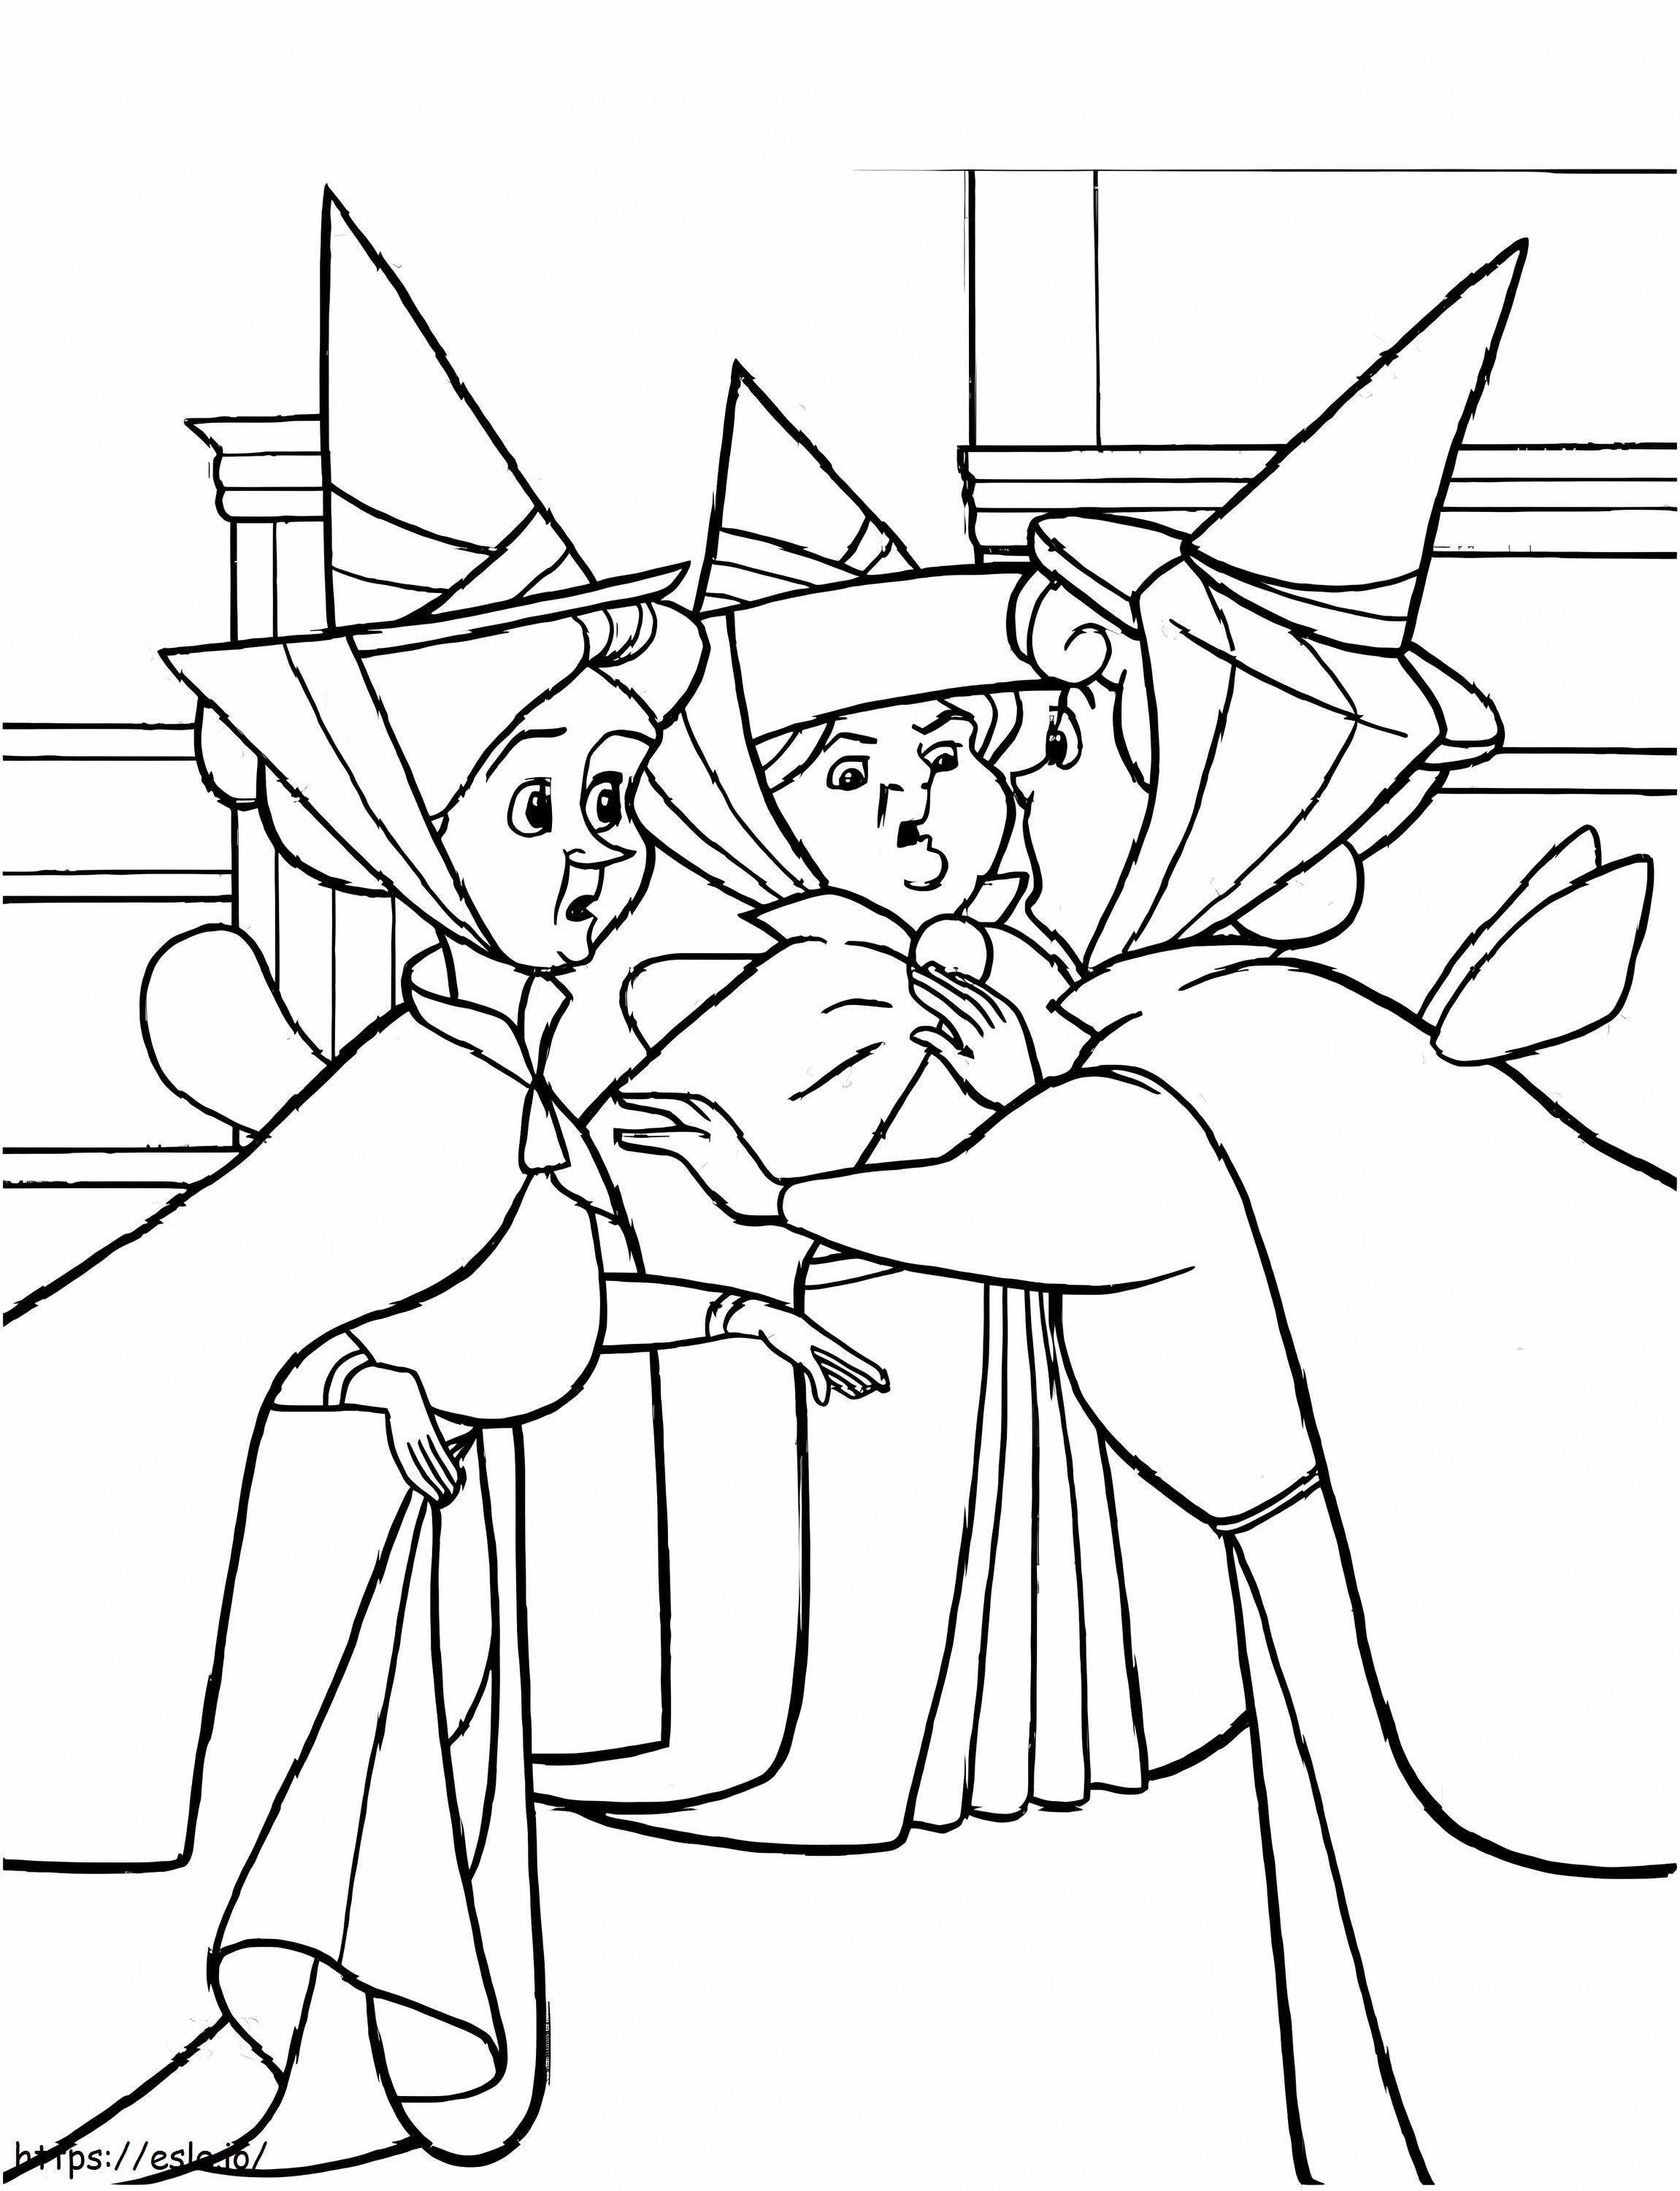 1567237415 Flora Fauna N Merryweather A4 coloring page